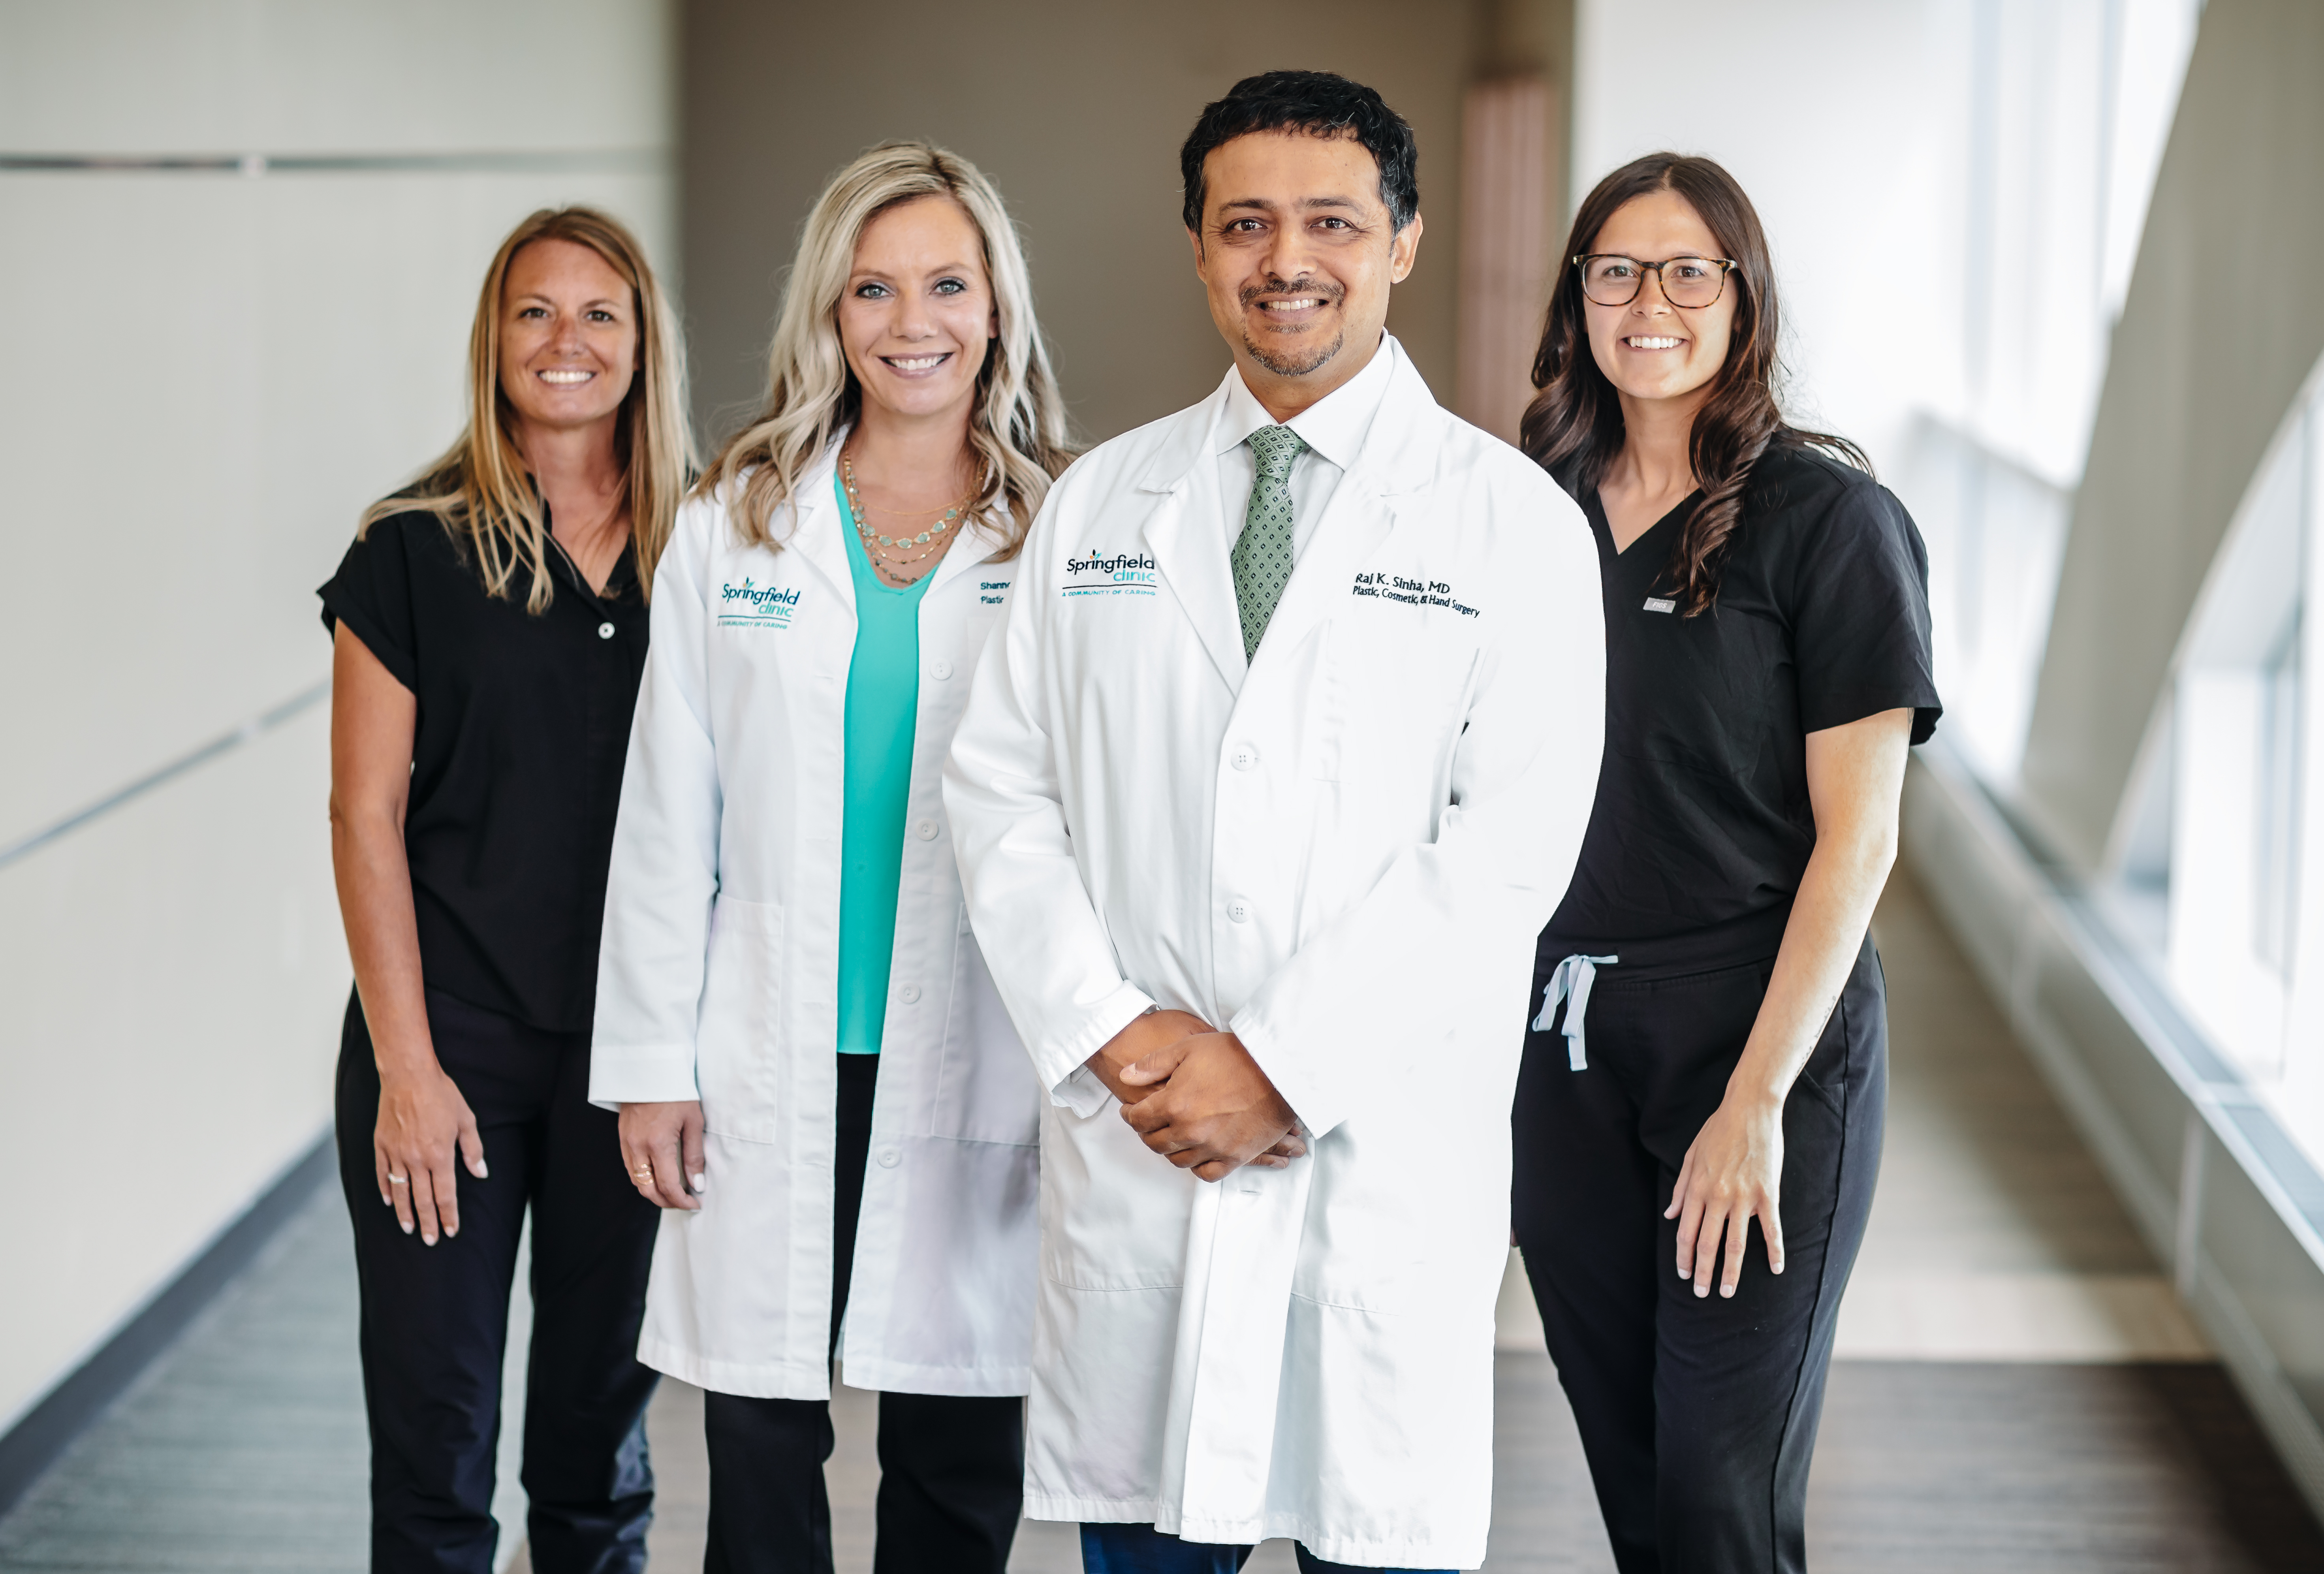 Dr. Raj Sinha, Shannon Fasig, APRN and medical team standing for a group shot.